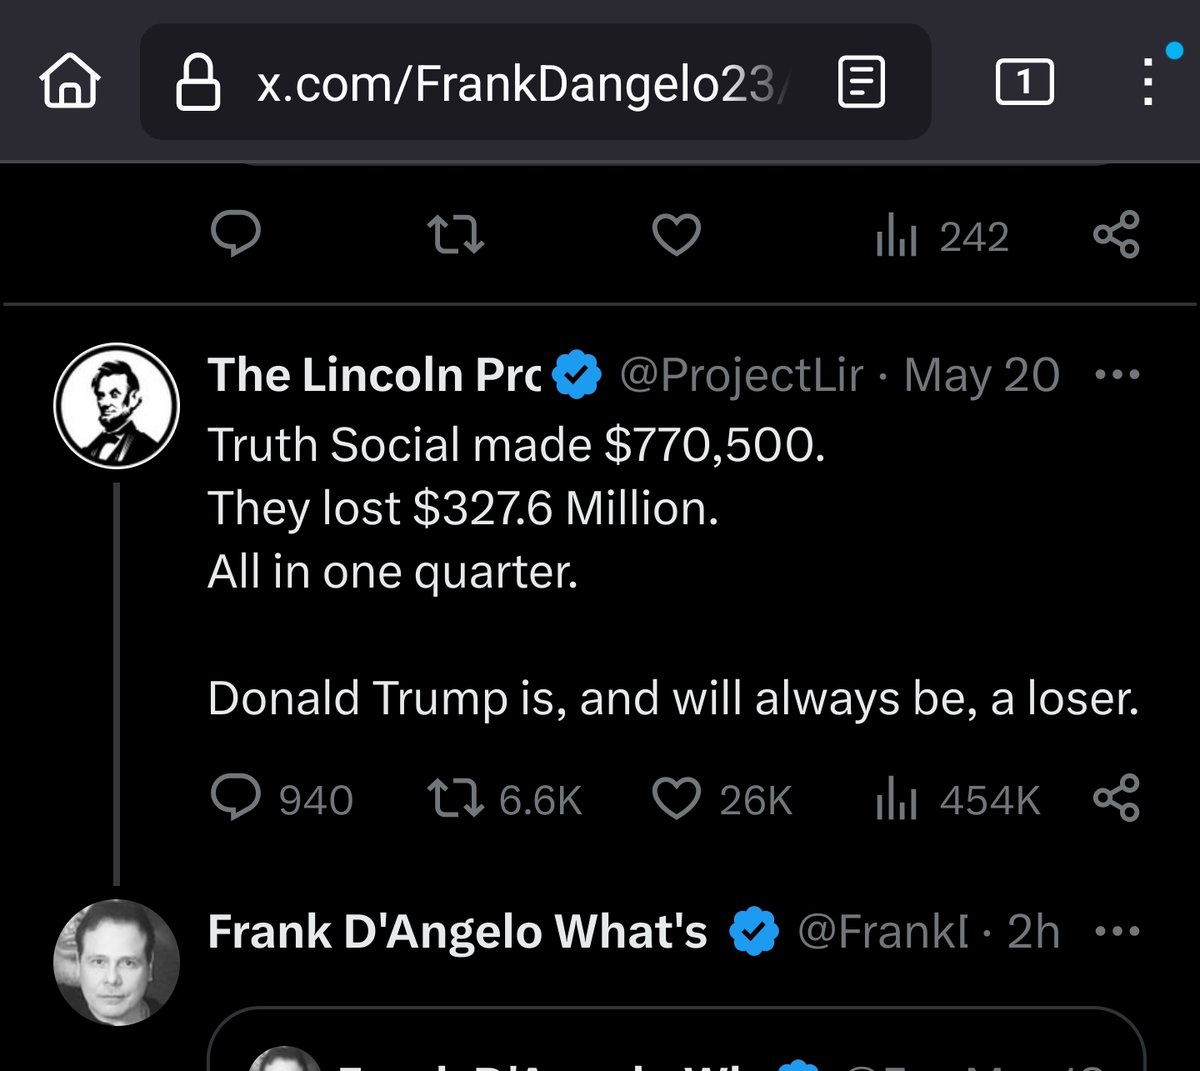 Frank D'Angelo chiming in on how bad Trump is in business is a severe lack of self-awareness. #Bankrupt | #Loser | #Douchebag